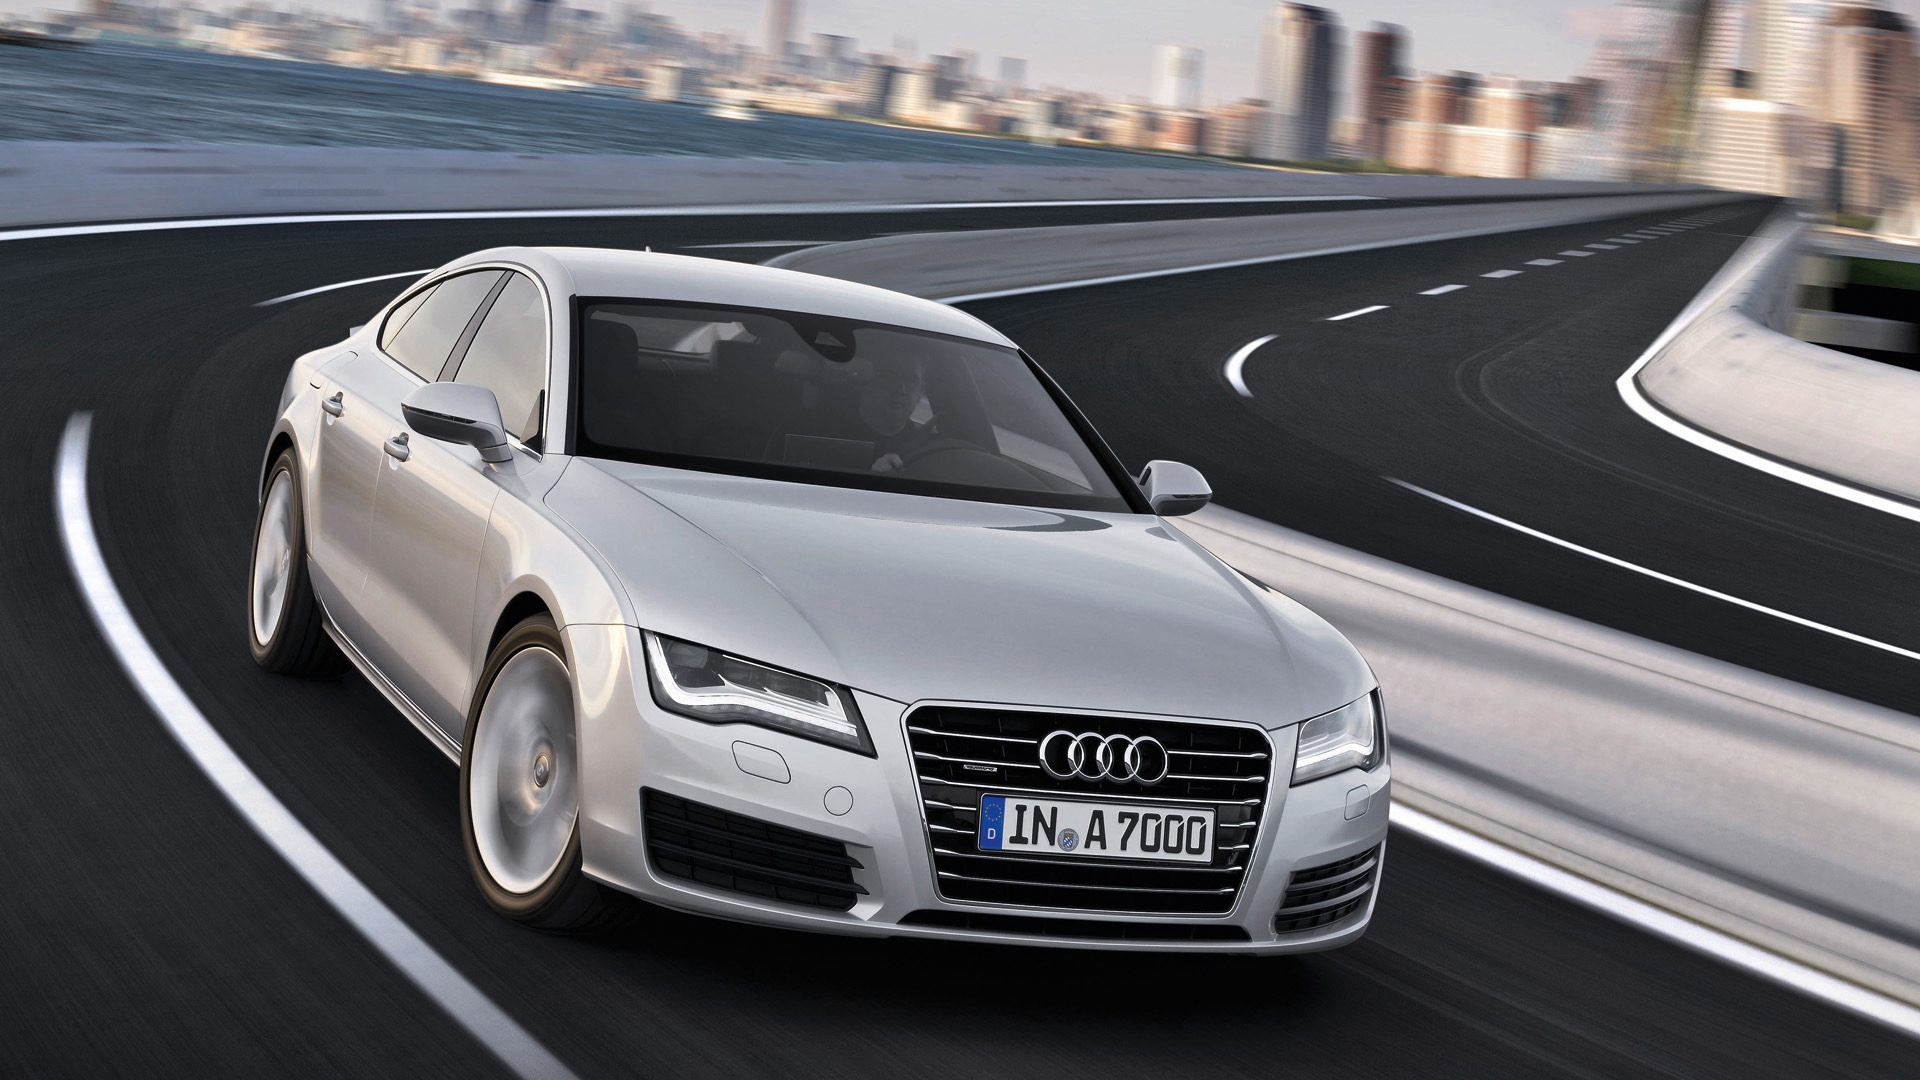 Audi A7 Sportback Speed for 1920 x 1080 HDTV 1080p resolution